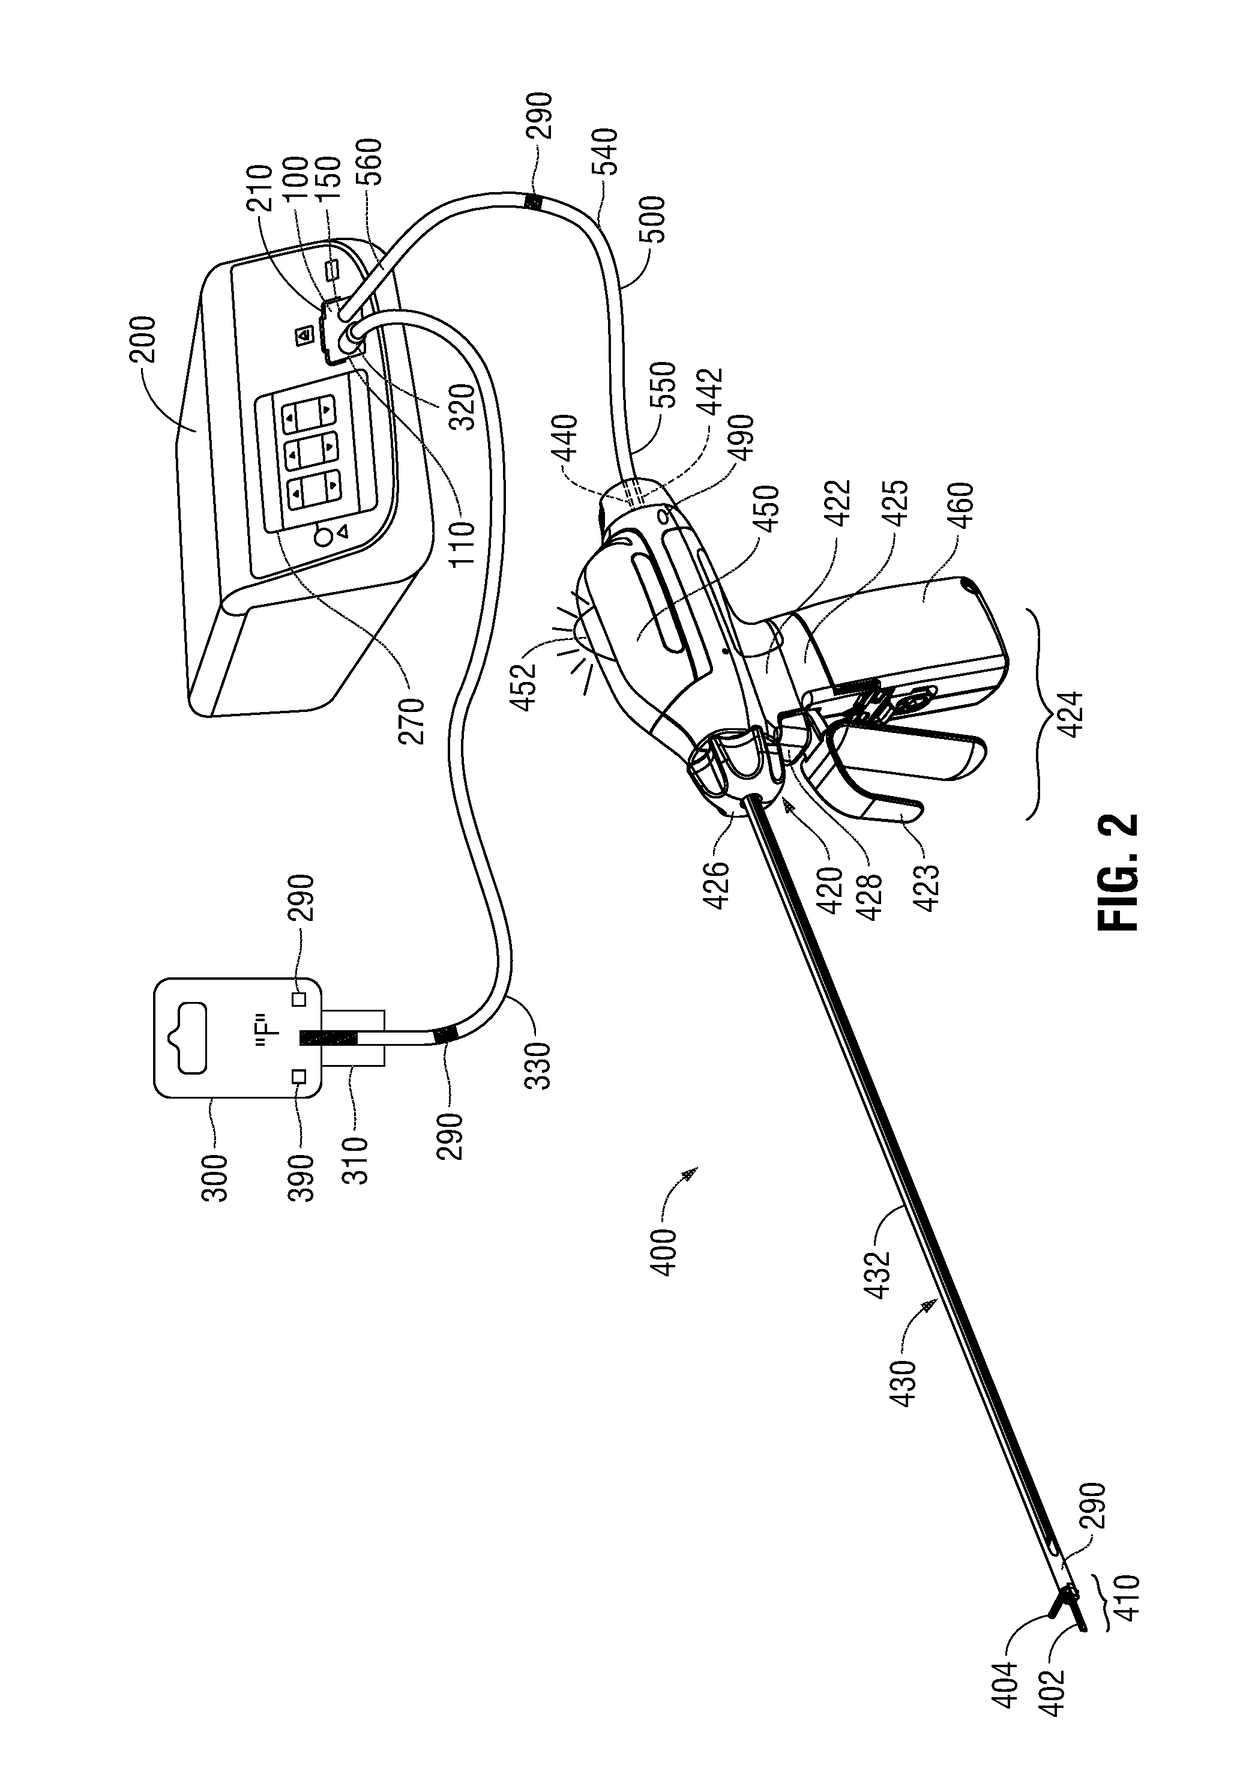 Devices, systems, and methods for establishing electrical and fluid connections to surgical instruments